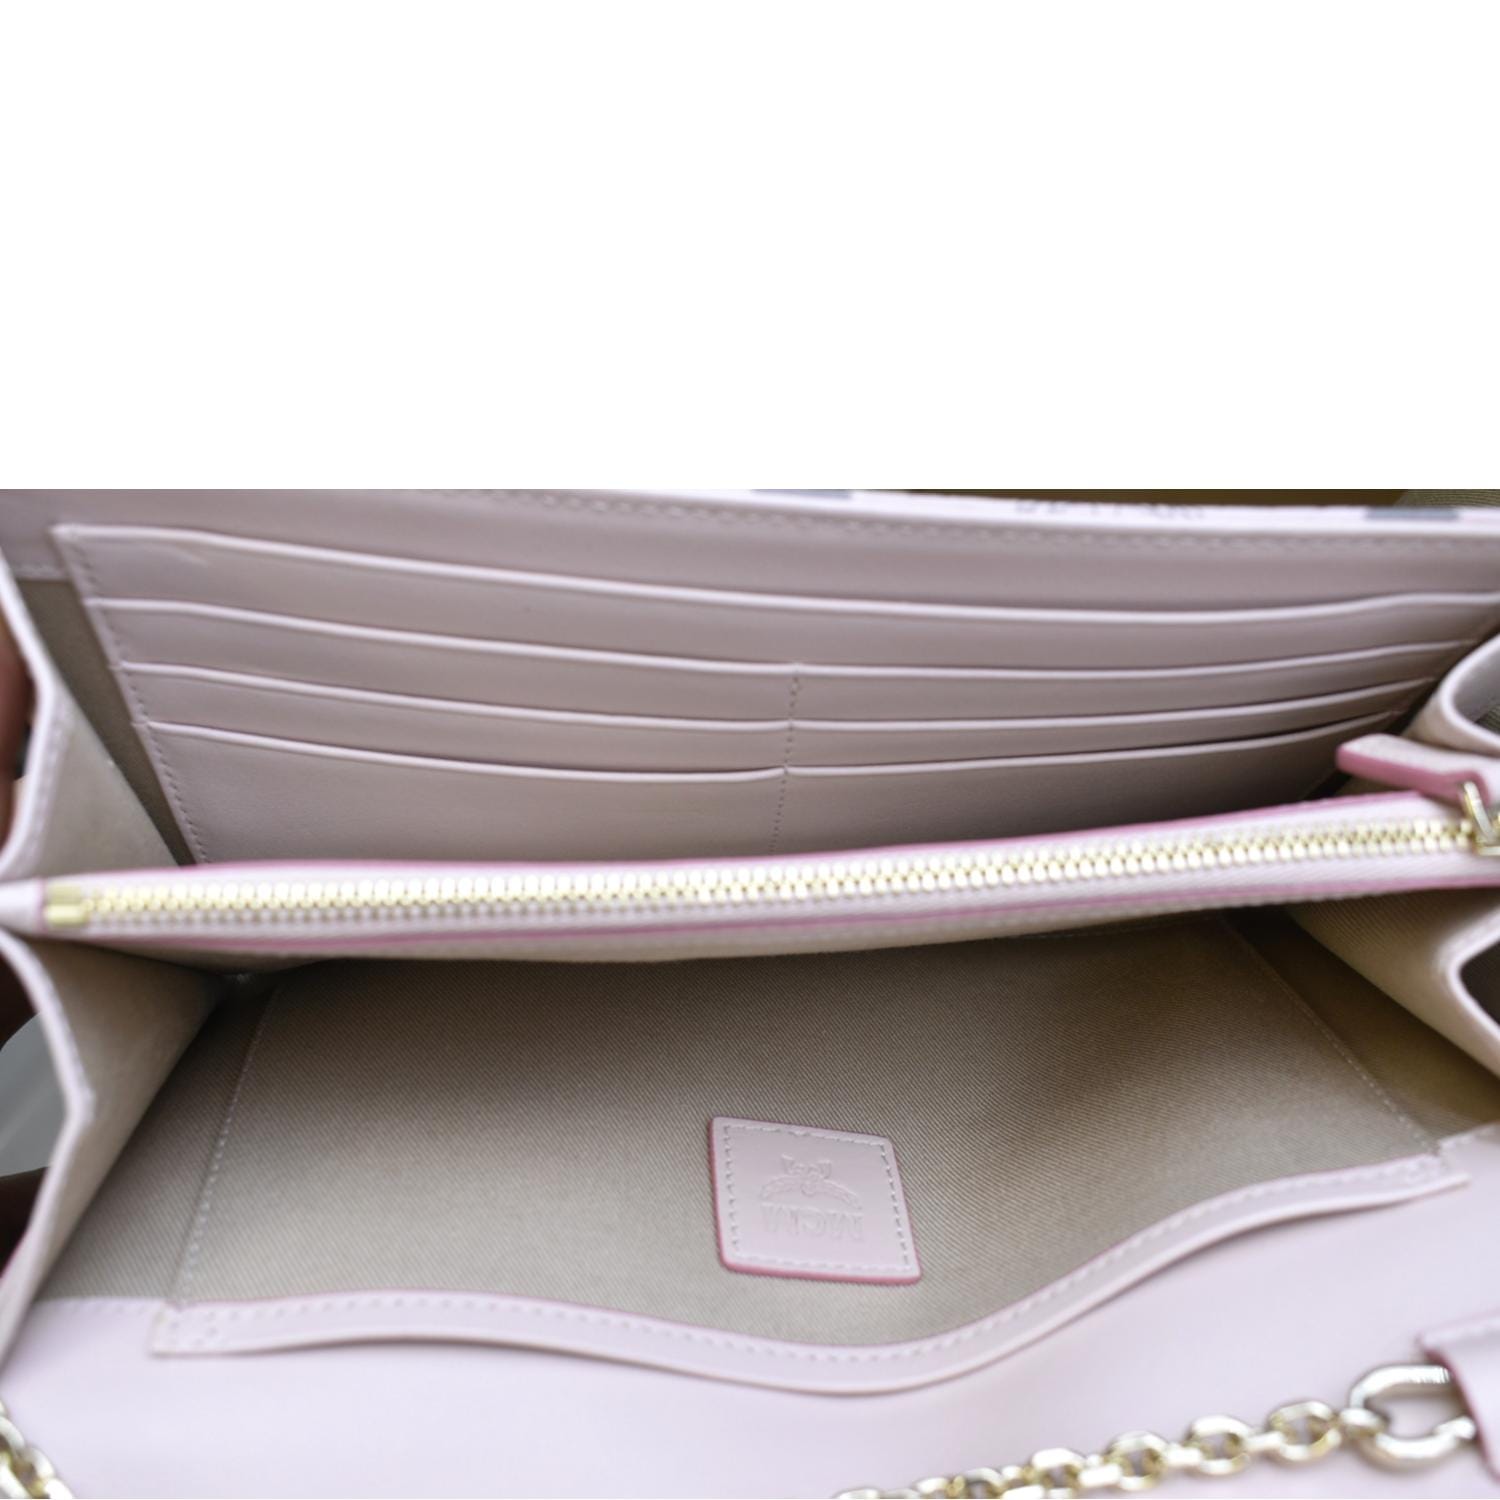 MCM Patricia Crossbody Shoulder Bag Sugar Pink in Leather with Silver-tone  - US